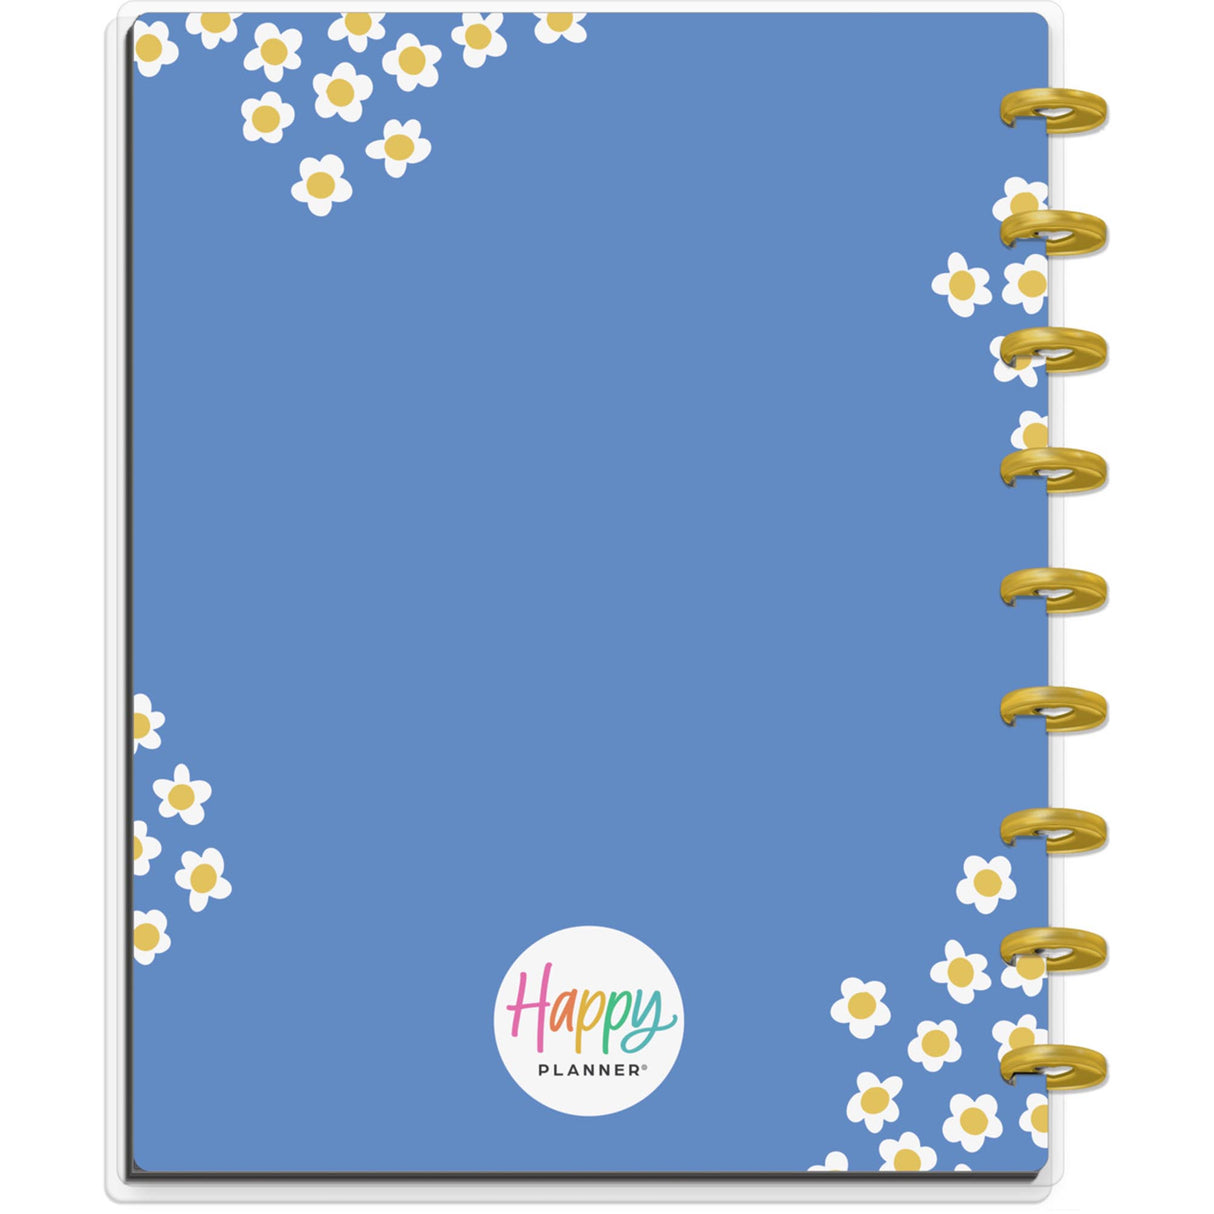 Happy Planner Mail Call Notebook back cover